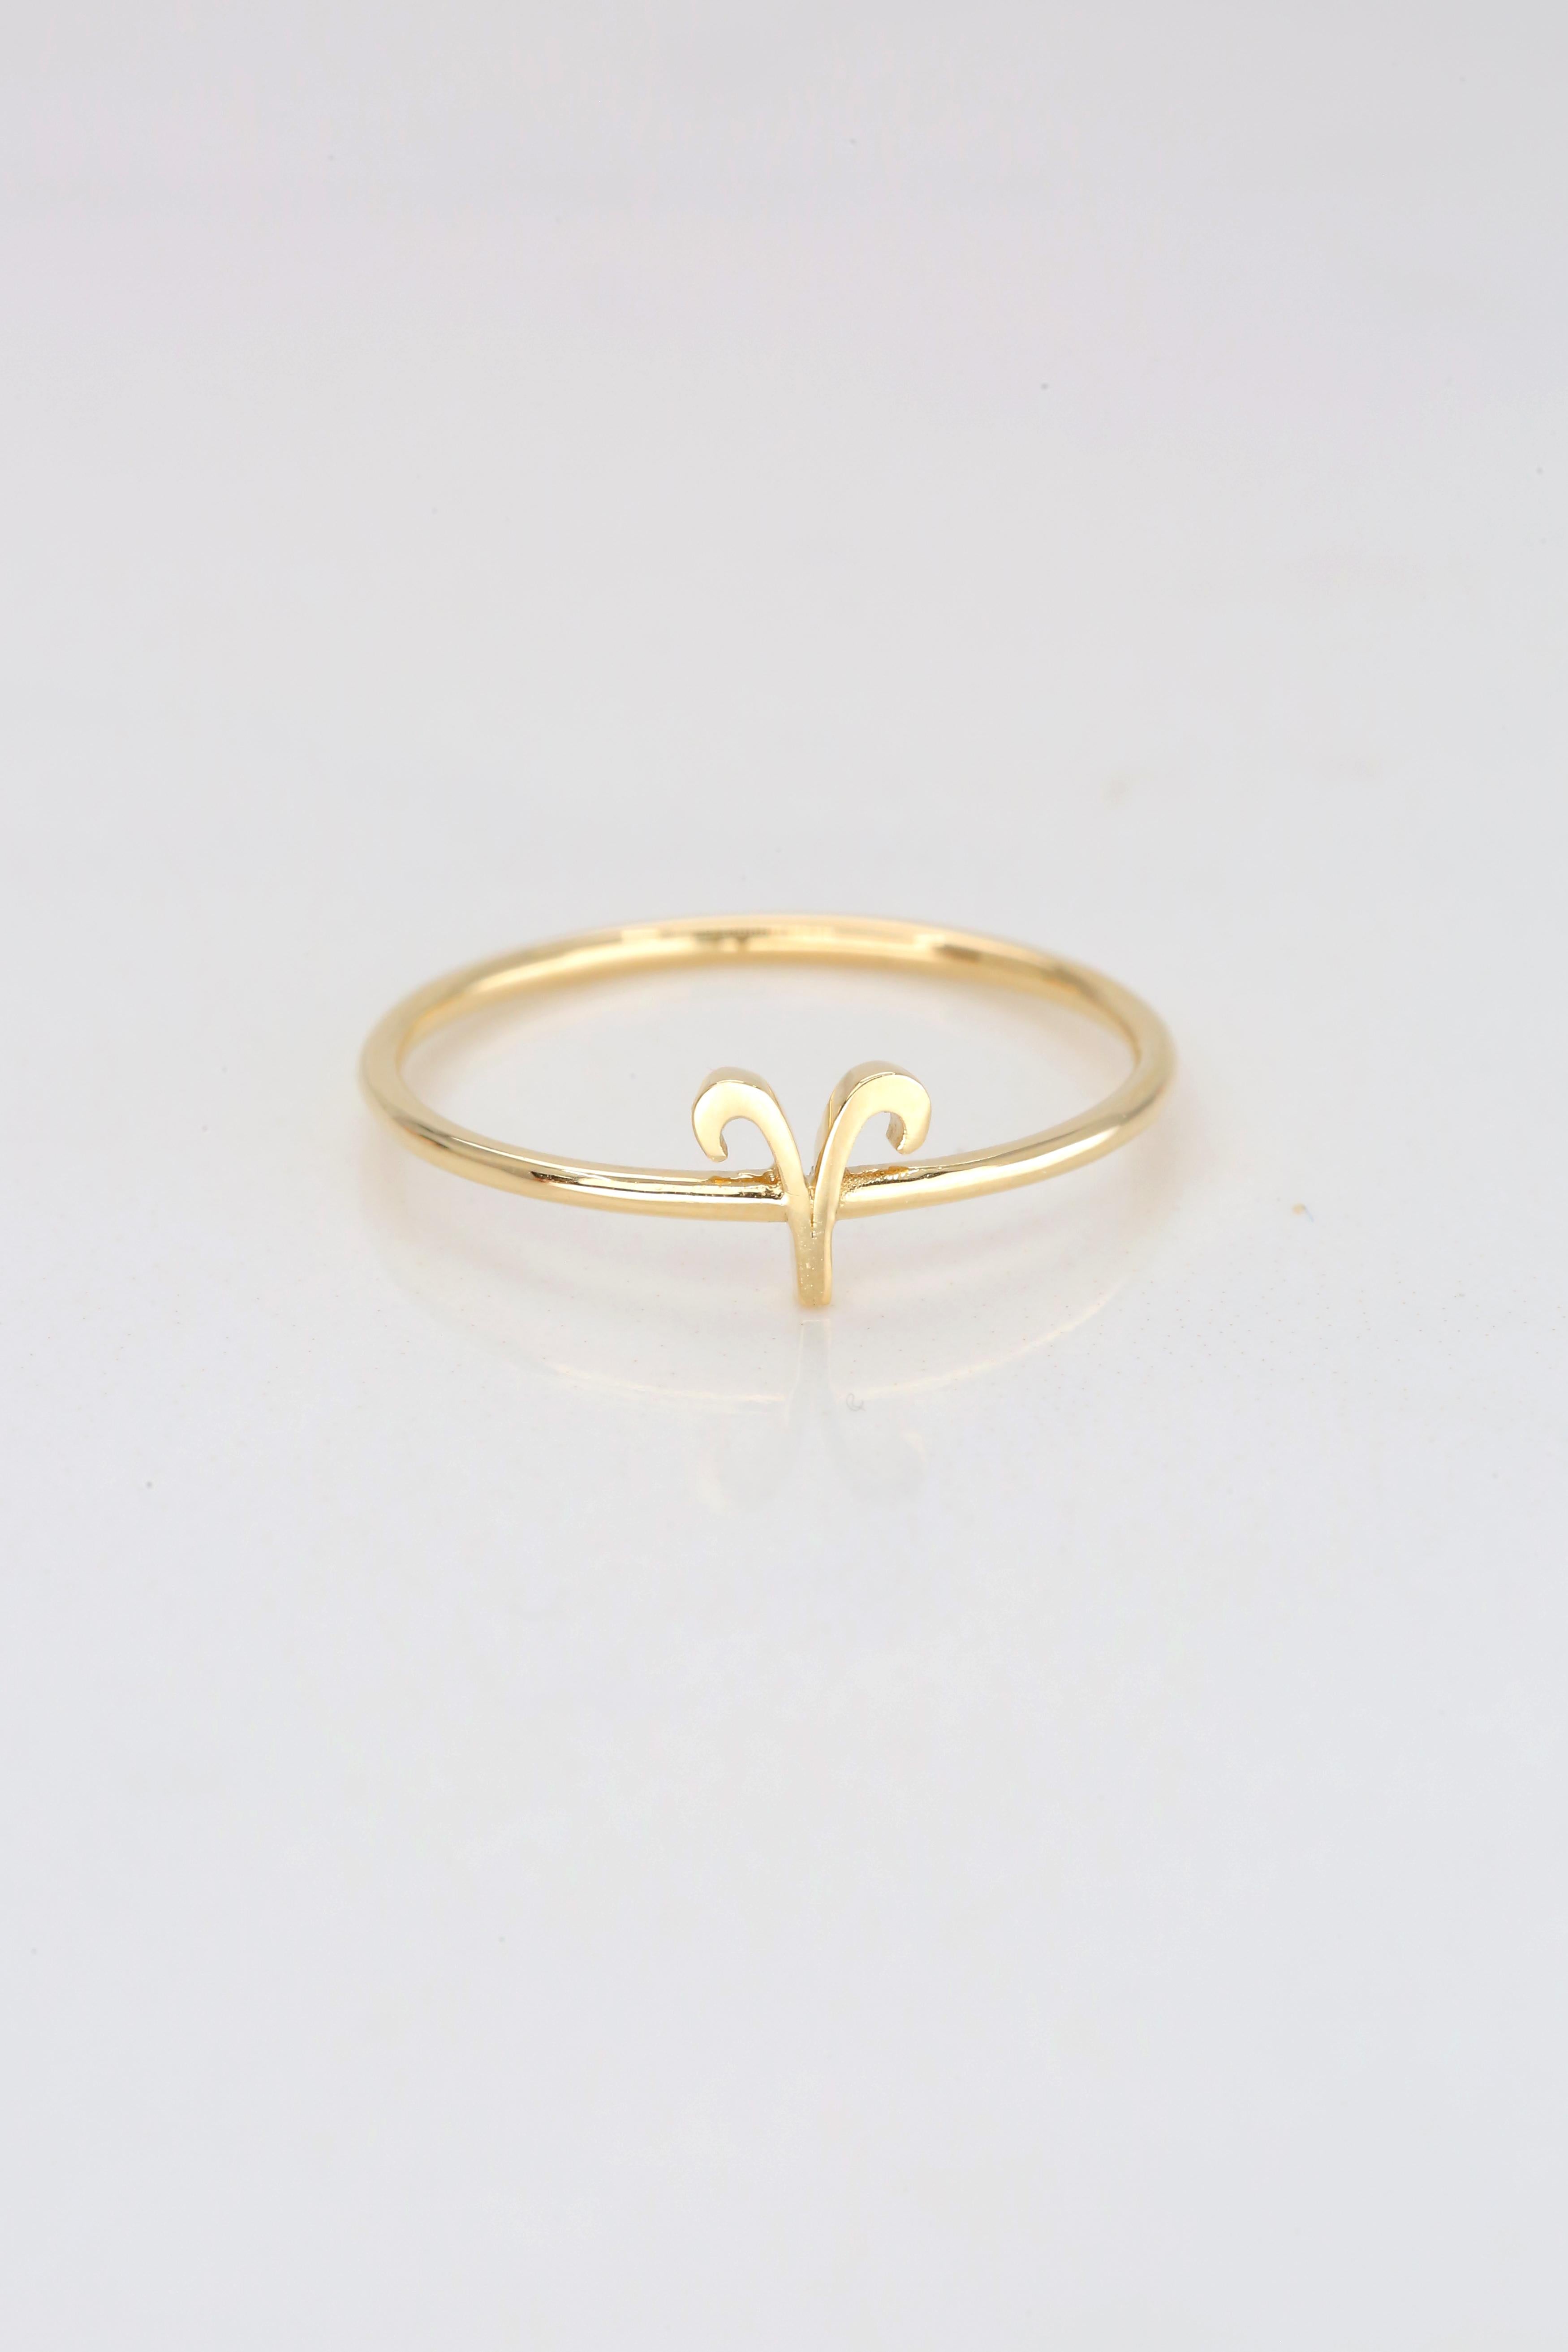 For Sale:  14K Gold Aries Zodiac Ring, Aries Sign Zodiac Ring 7